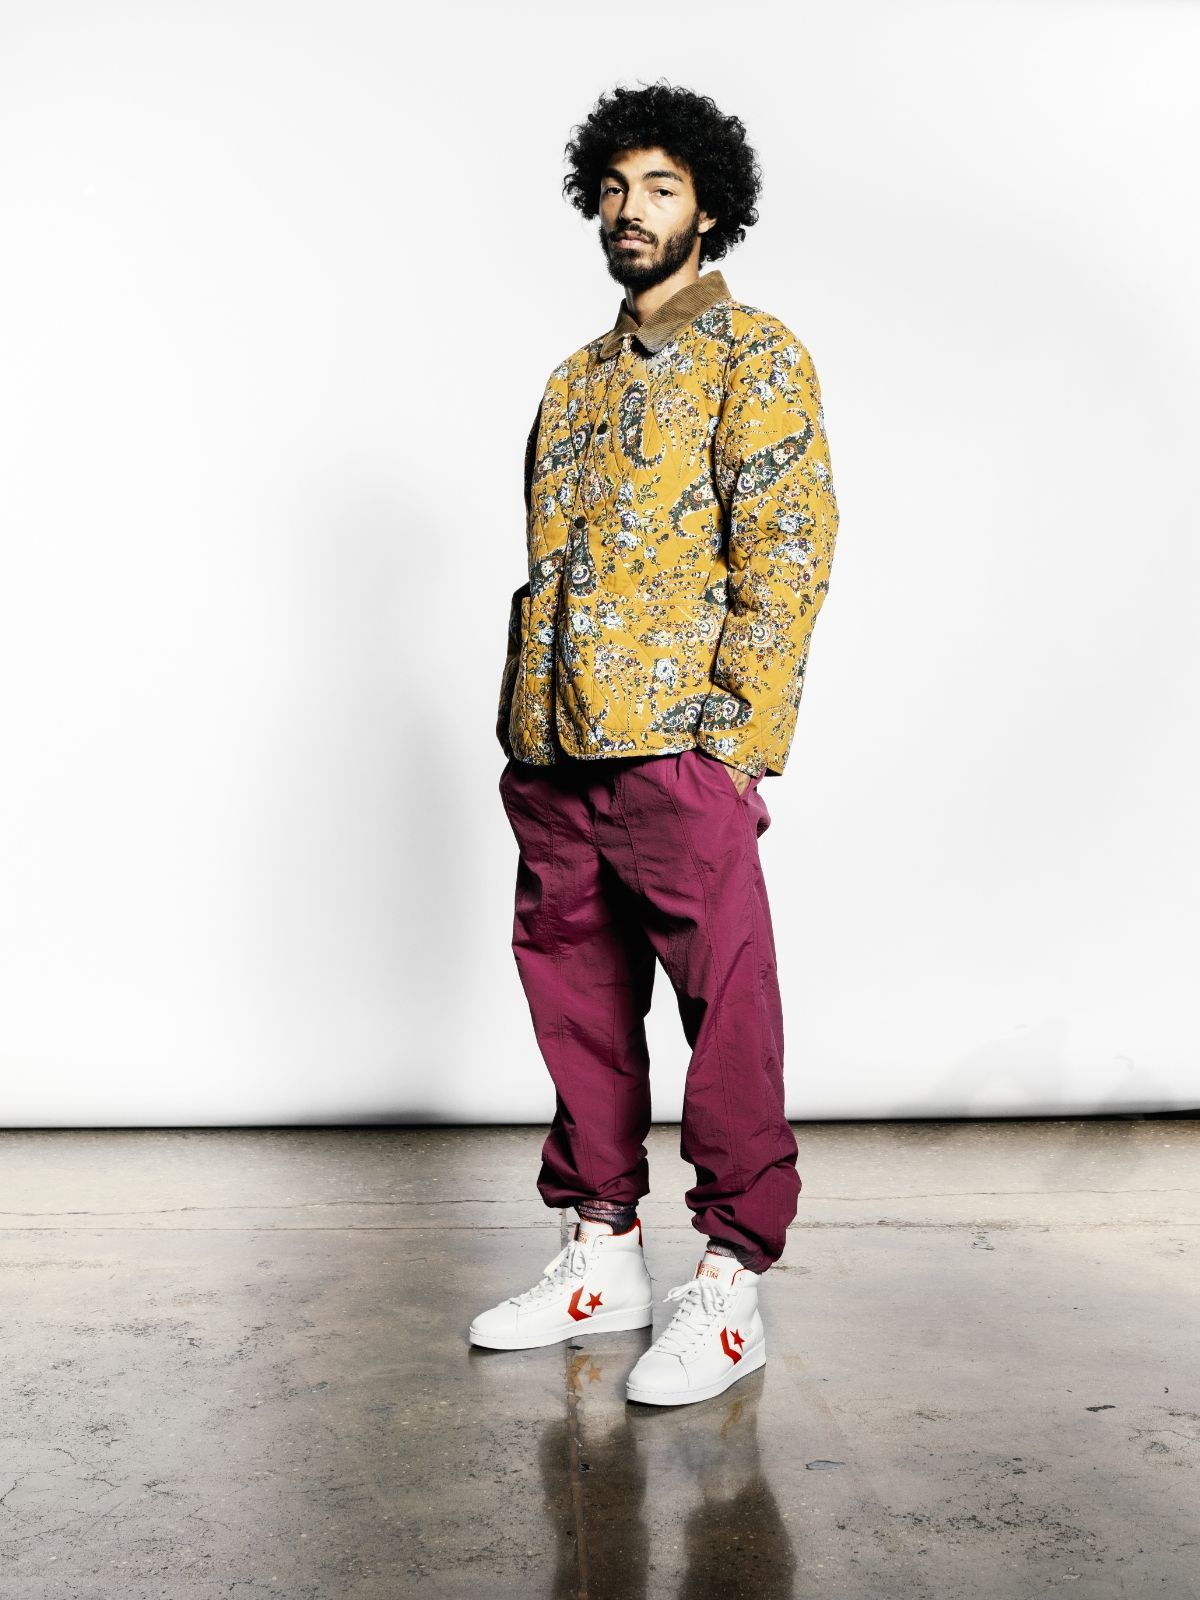 Sage Elsesser standing in floral shirt, red pants and white and red converse pro leather high top sneakers